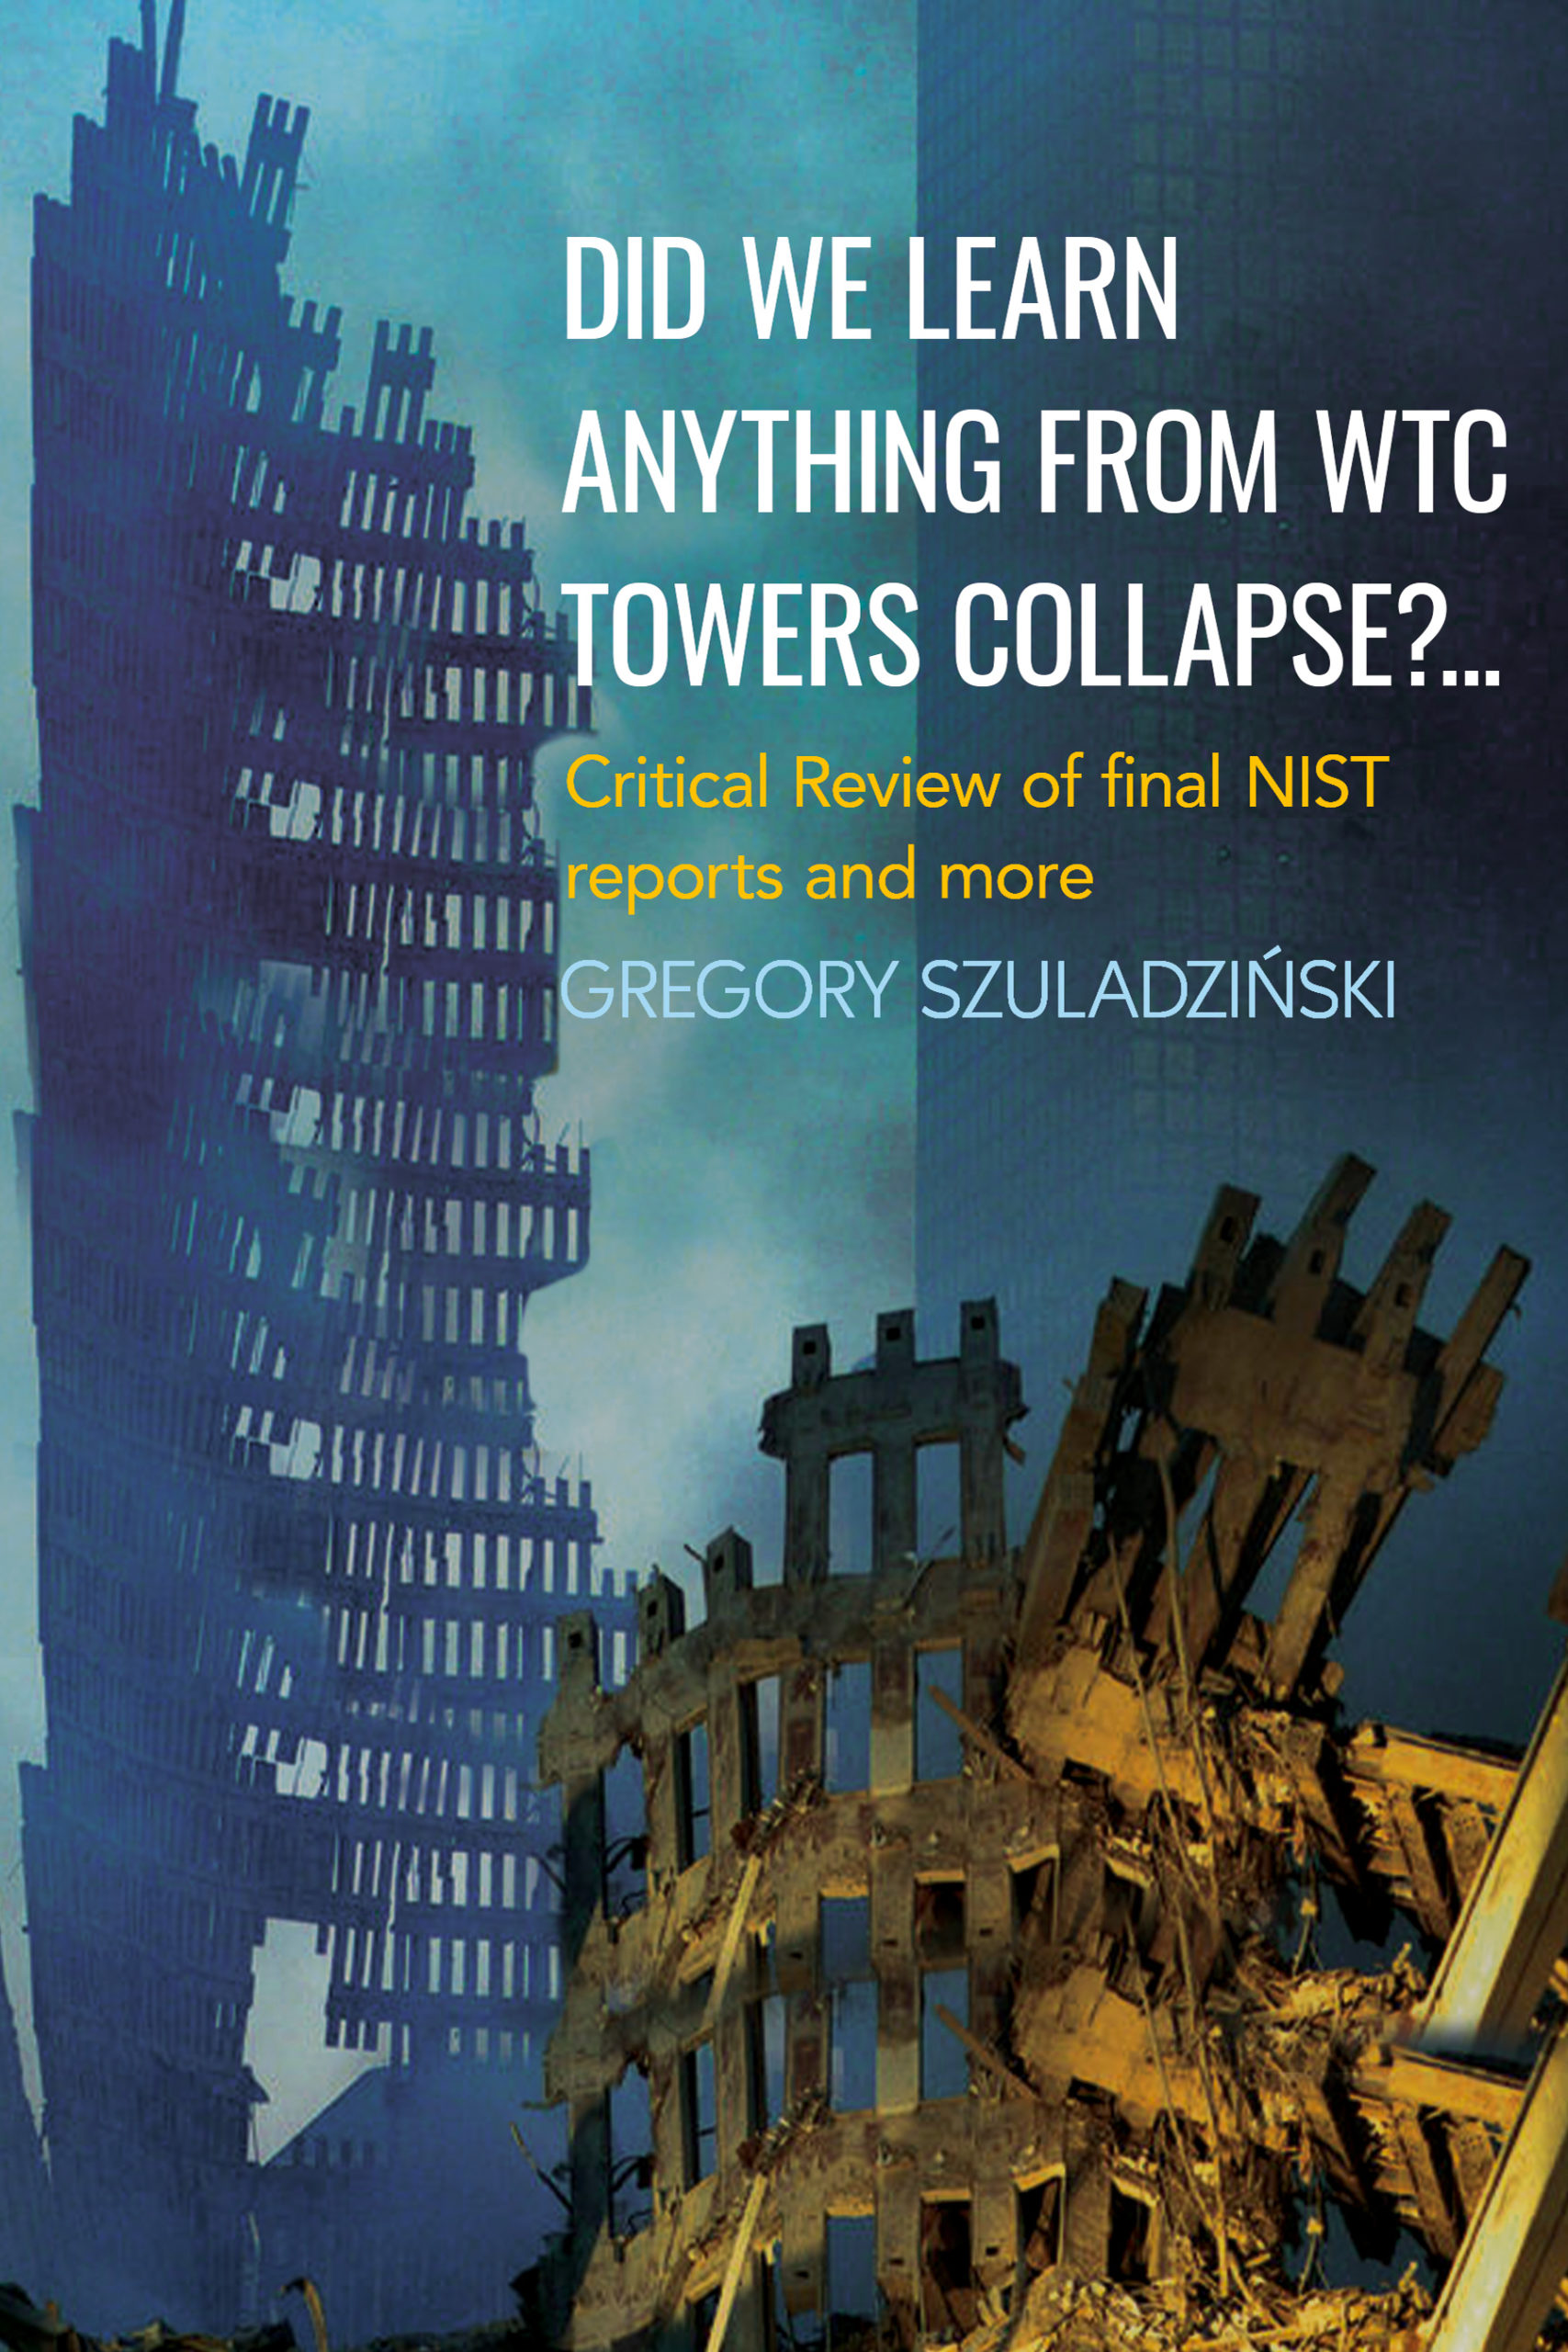 Did We Learn Anything from WTC Towers Collapse? by Gregory Szuladzinski